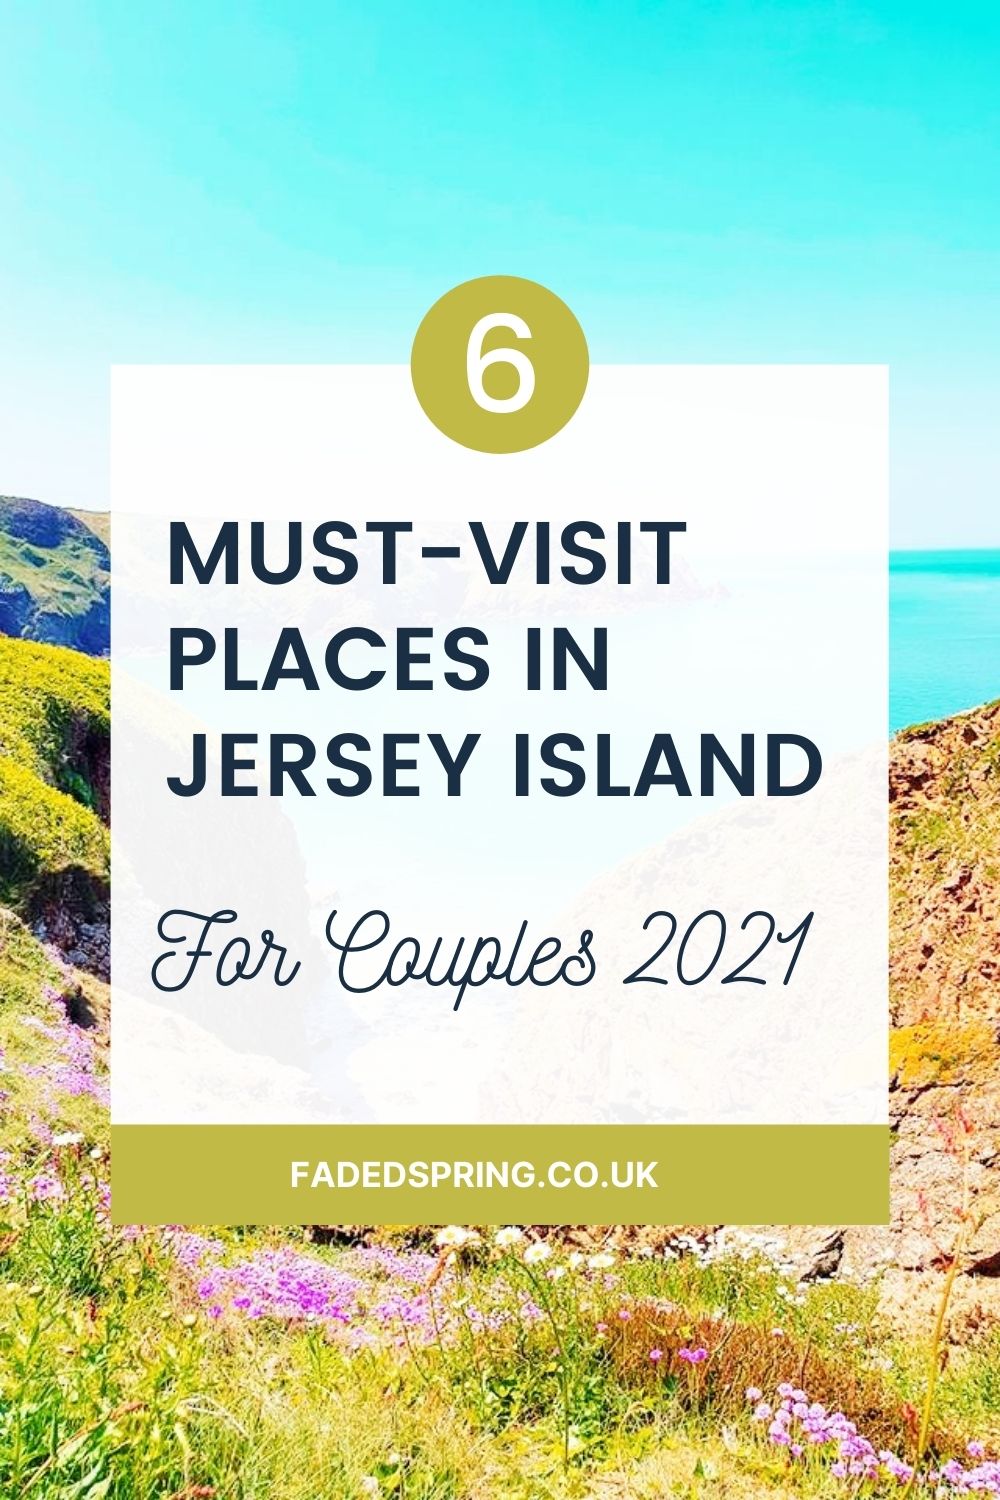 <img src="mustjpg" alt="must visit places in Jersey Island"/> 